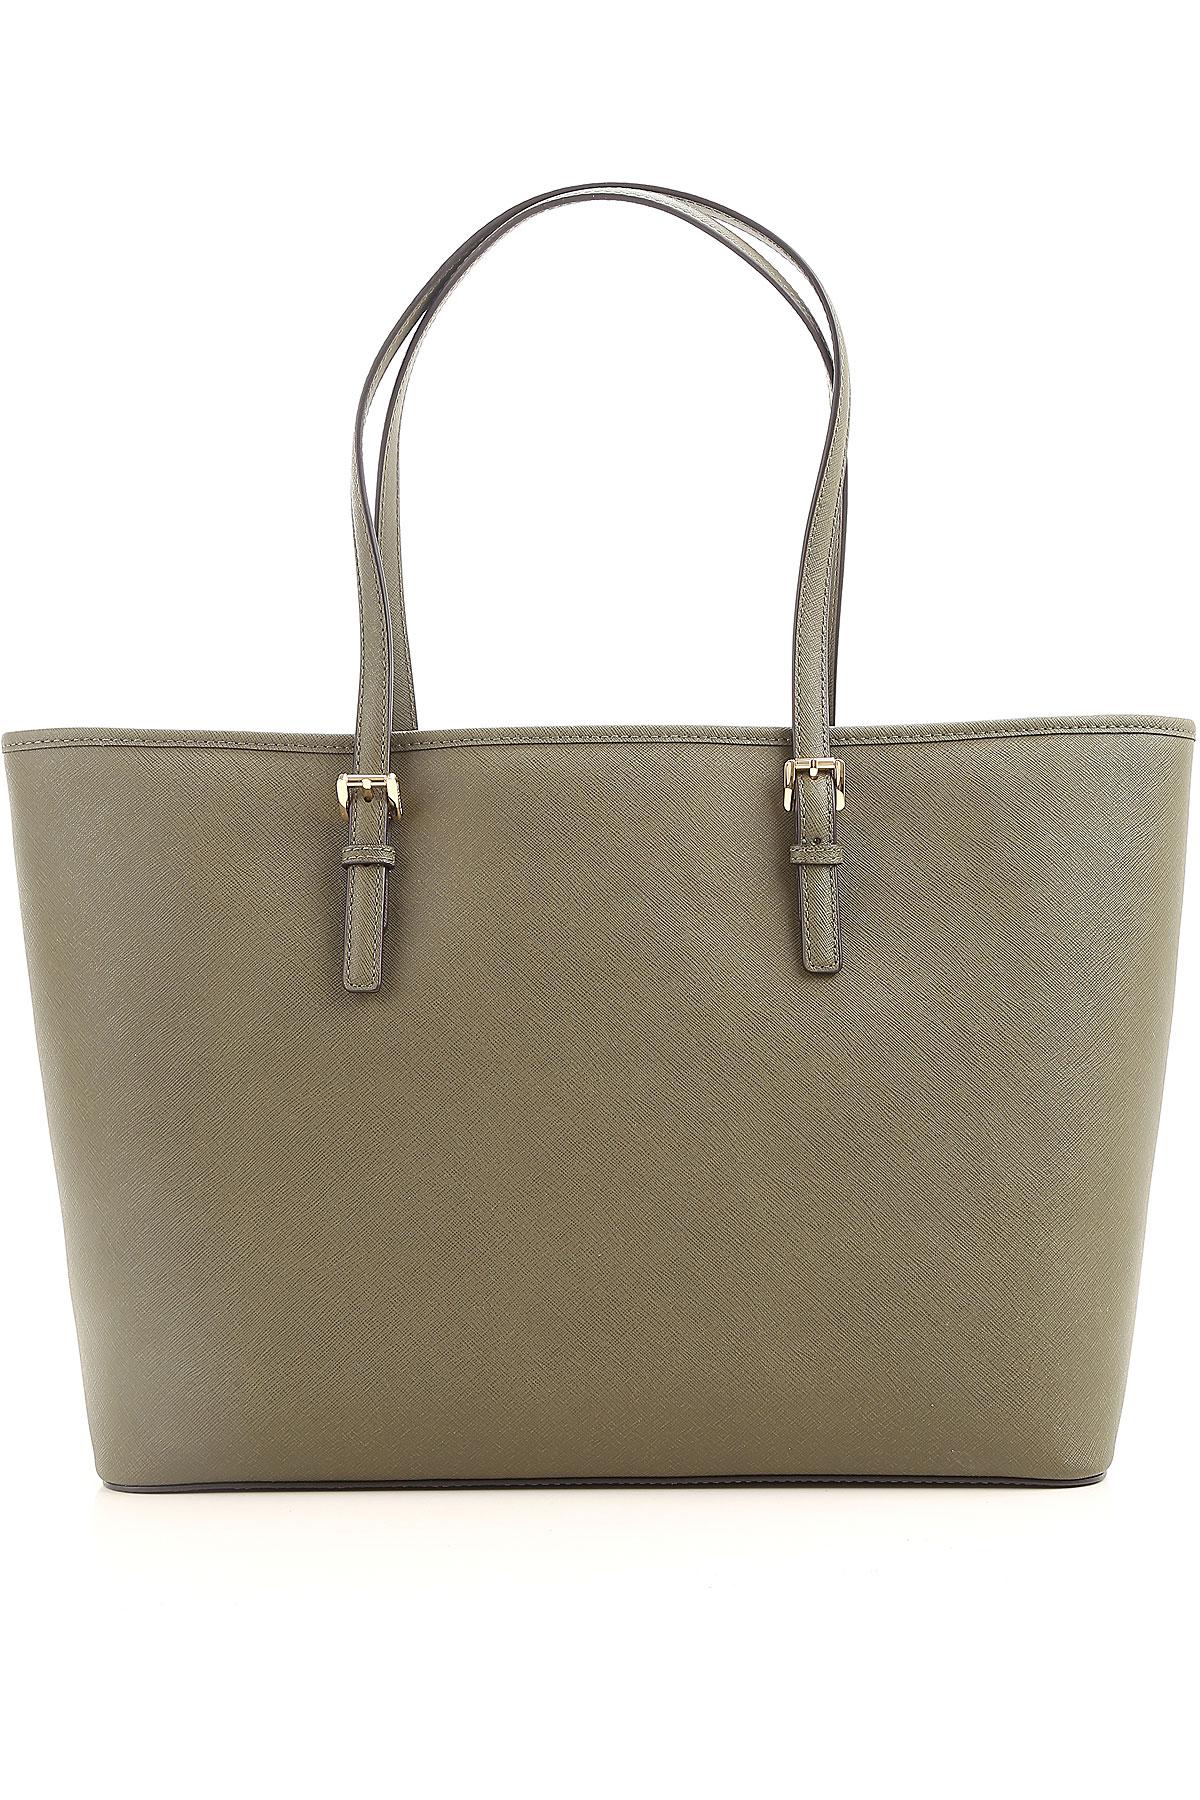 Michael Kors Leather Tote Bag On Sale In Outlet in Olive (Green) - Lyst